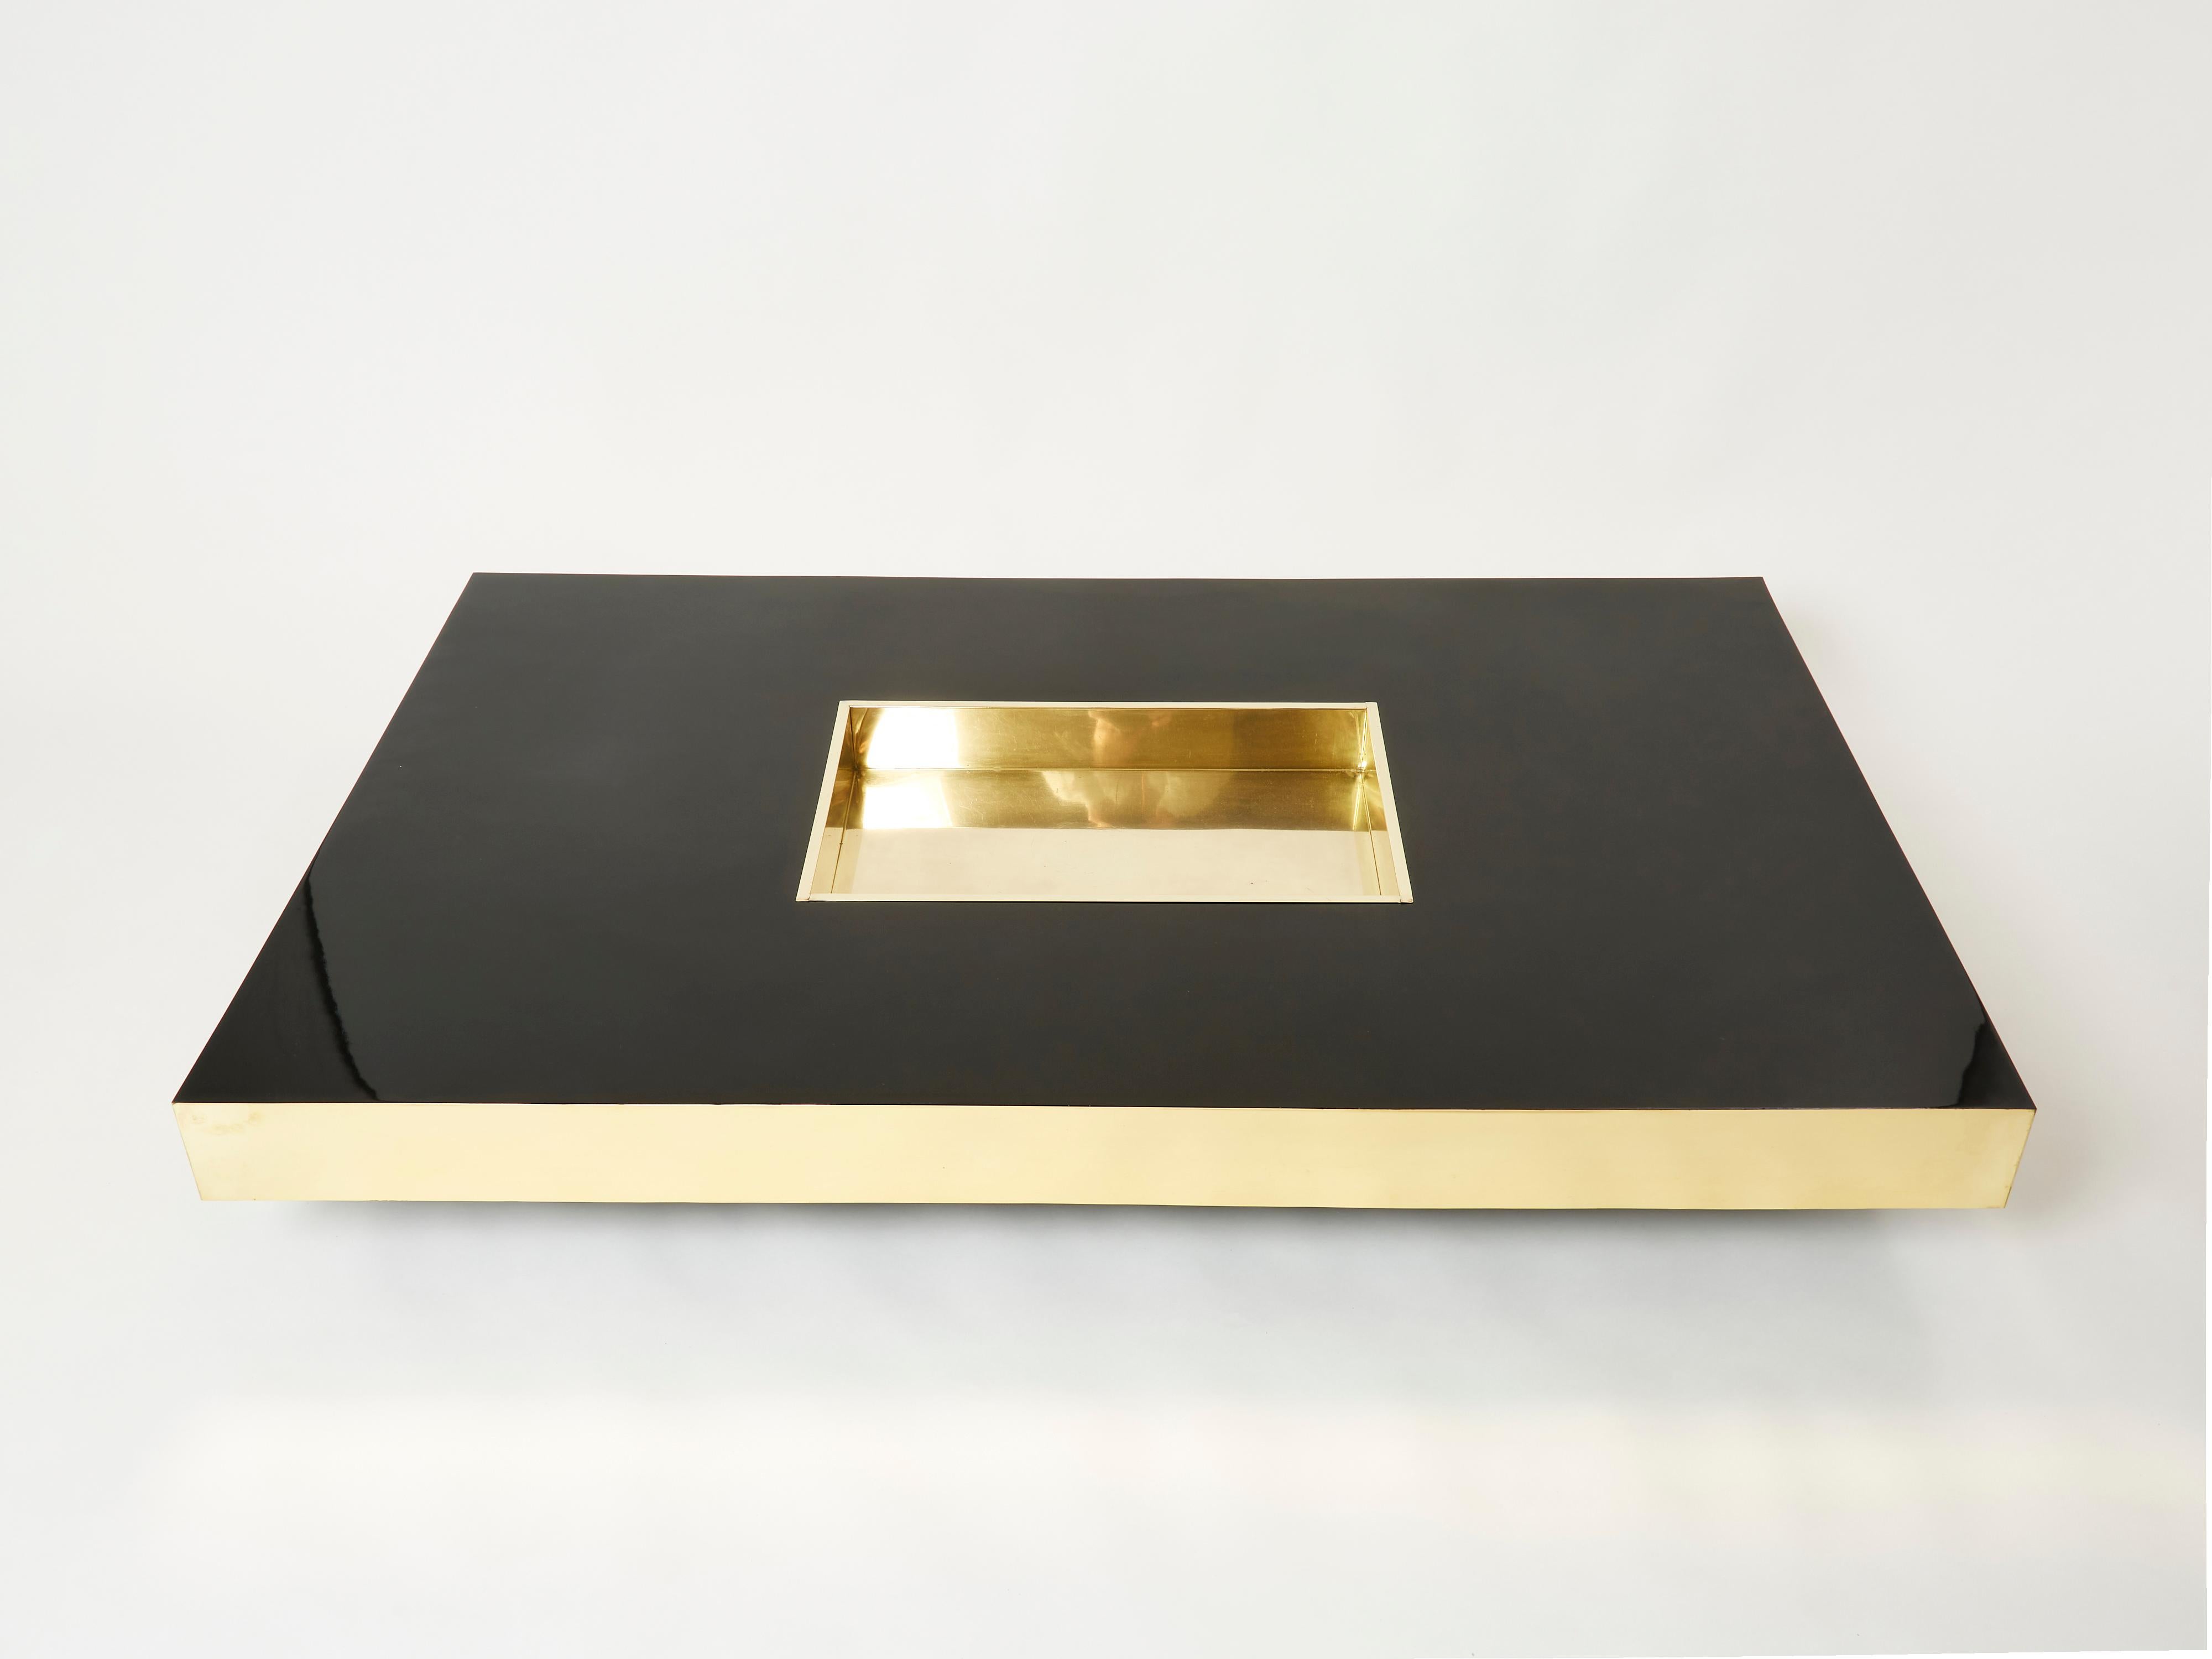 This stunning coffee table is guaranteed to be the focus of attention when you entertain guests, and will make a fascinating centerpiece for your living room. Following the glamorous mid-century look of other classic Willy Rizzo designs, the